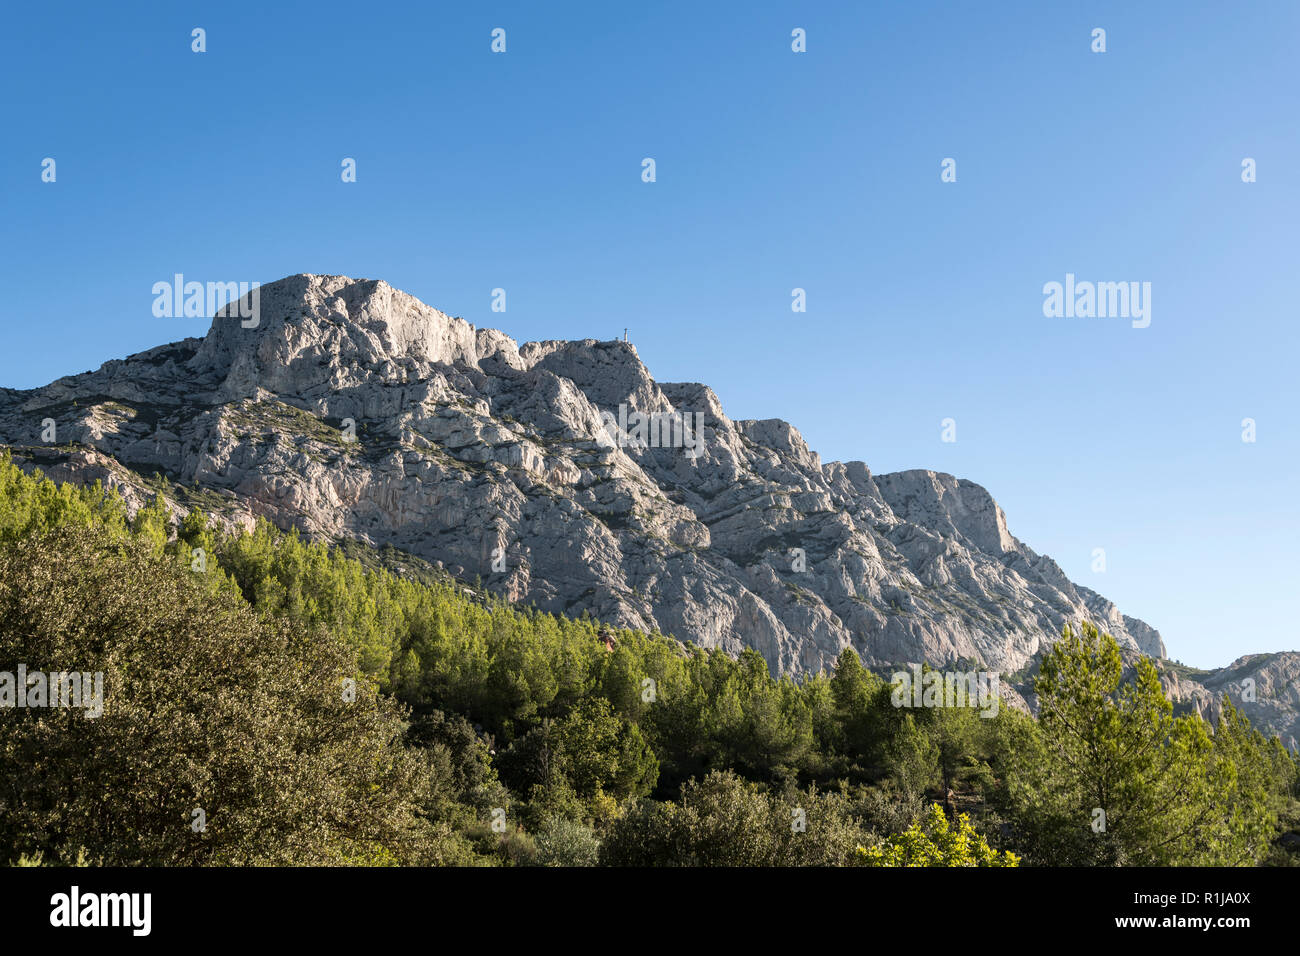 The famous and iconic Mountain Sainte-Victoire in South of France. France, Europe Stock Photo